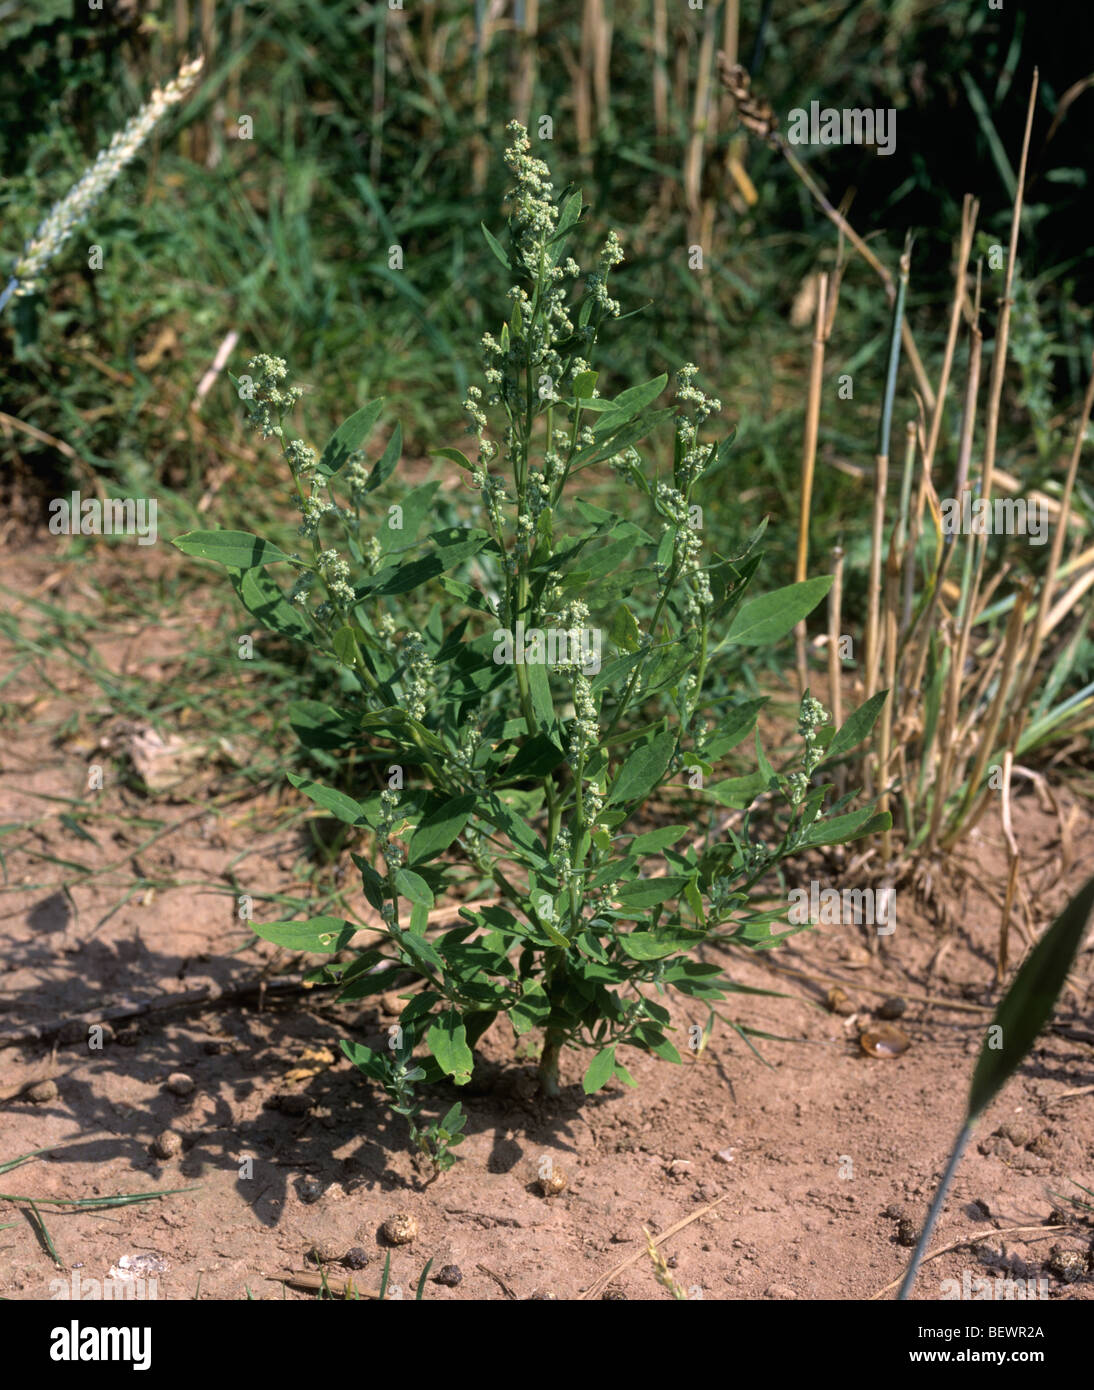 Flowering fat hen (Chenopodium album) an arable weed plant Stock Photo